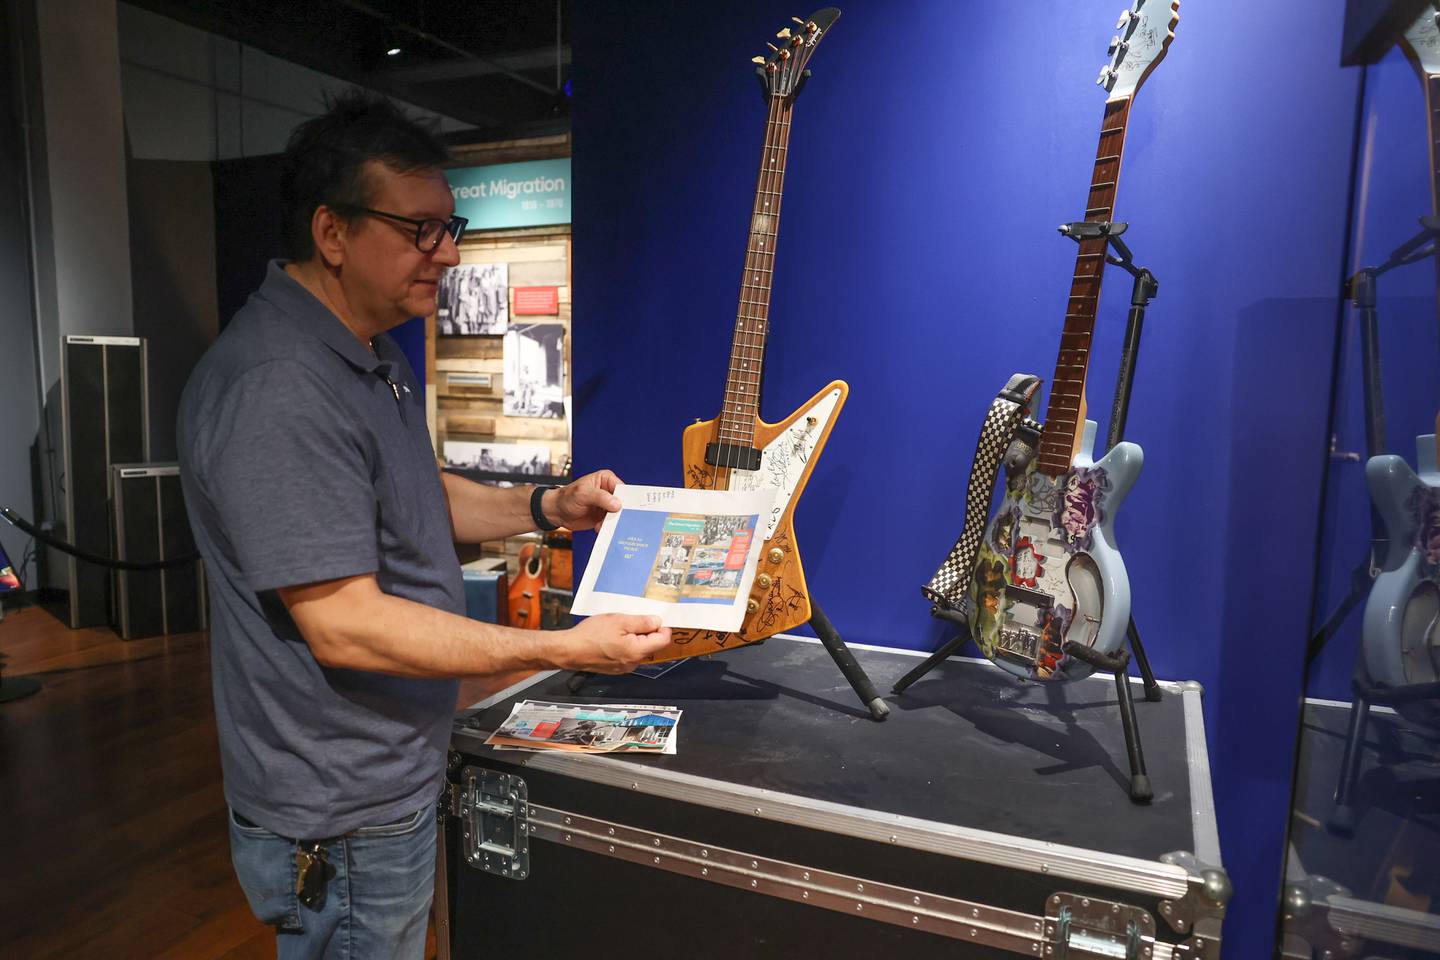 Ron Romero, founder and executive director of the Illinois Rock and Roll Museum of Route 66, stands out for his two guitars signed by notable artists, Paul Revere, Billy Sheehan, Eddie Money and Cheap Trick, to name a few. -ones.  The museum is expected to be fully open within the month.